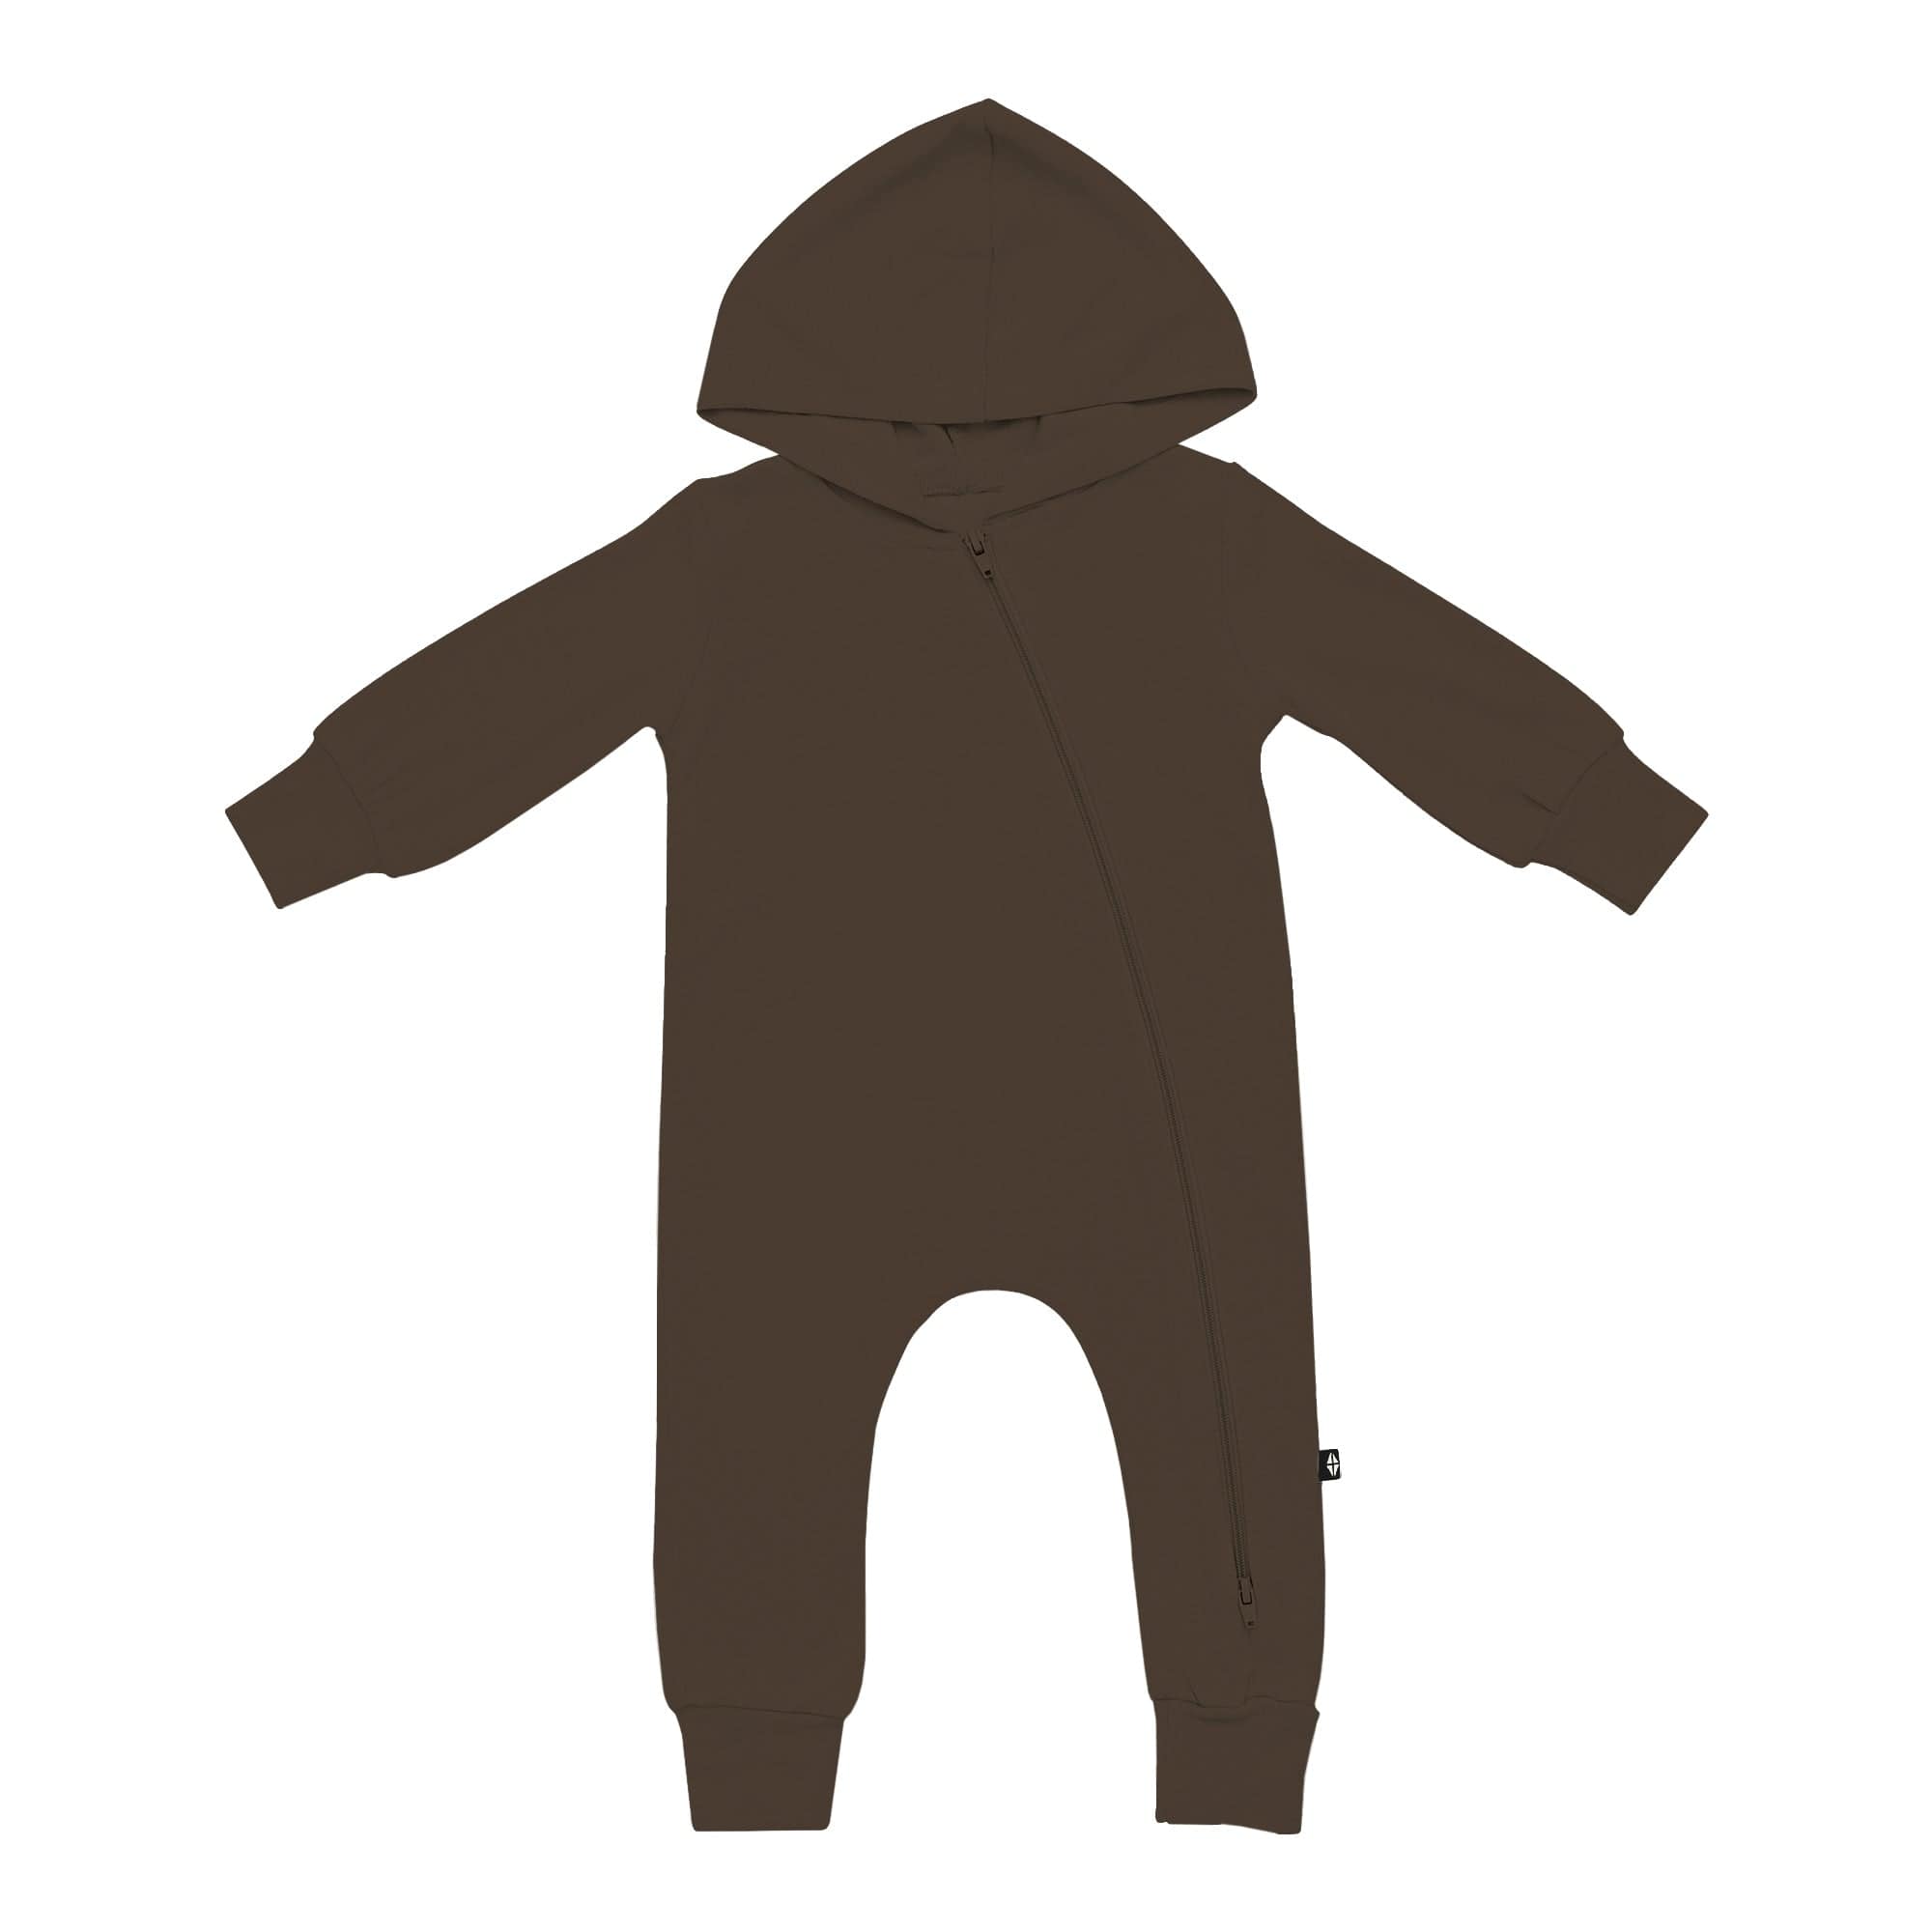 Kyte Baby Hooded Zippered Romper Bamboo Jersey Hooded Zippered Romper in Espresso